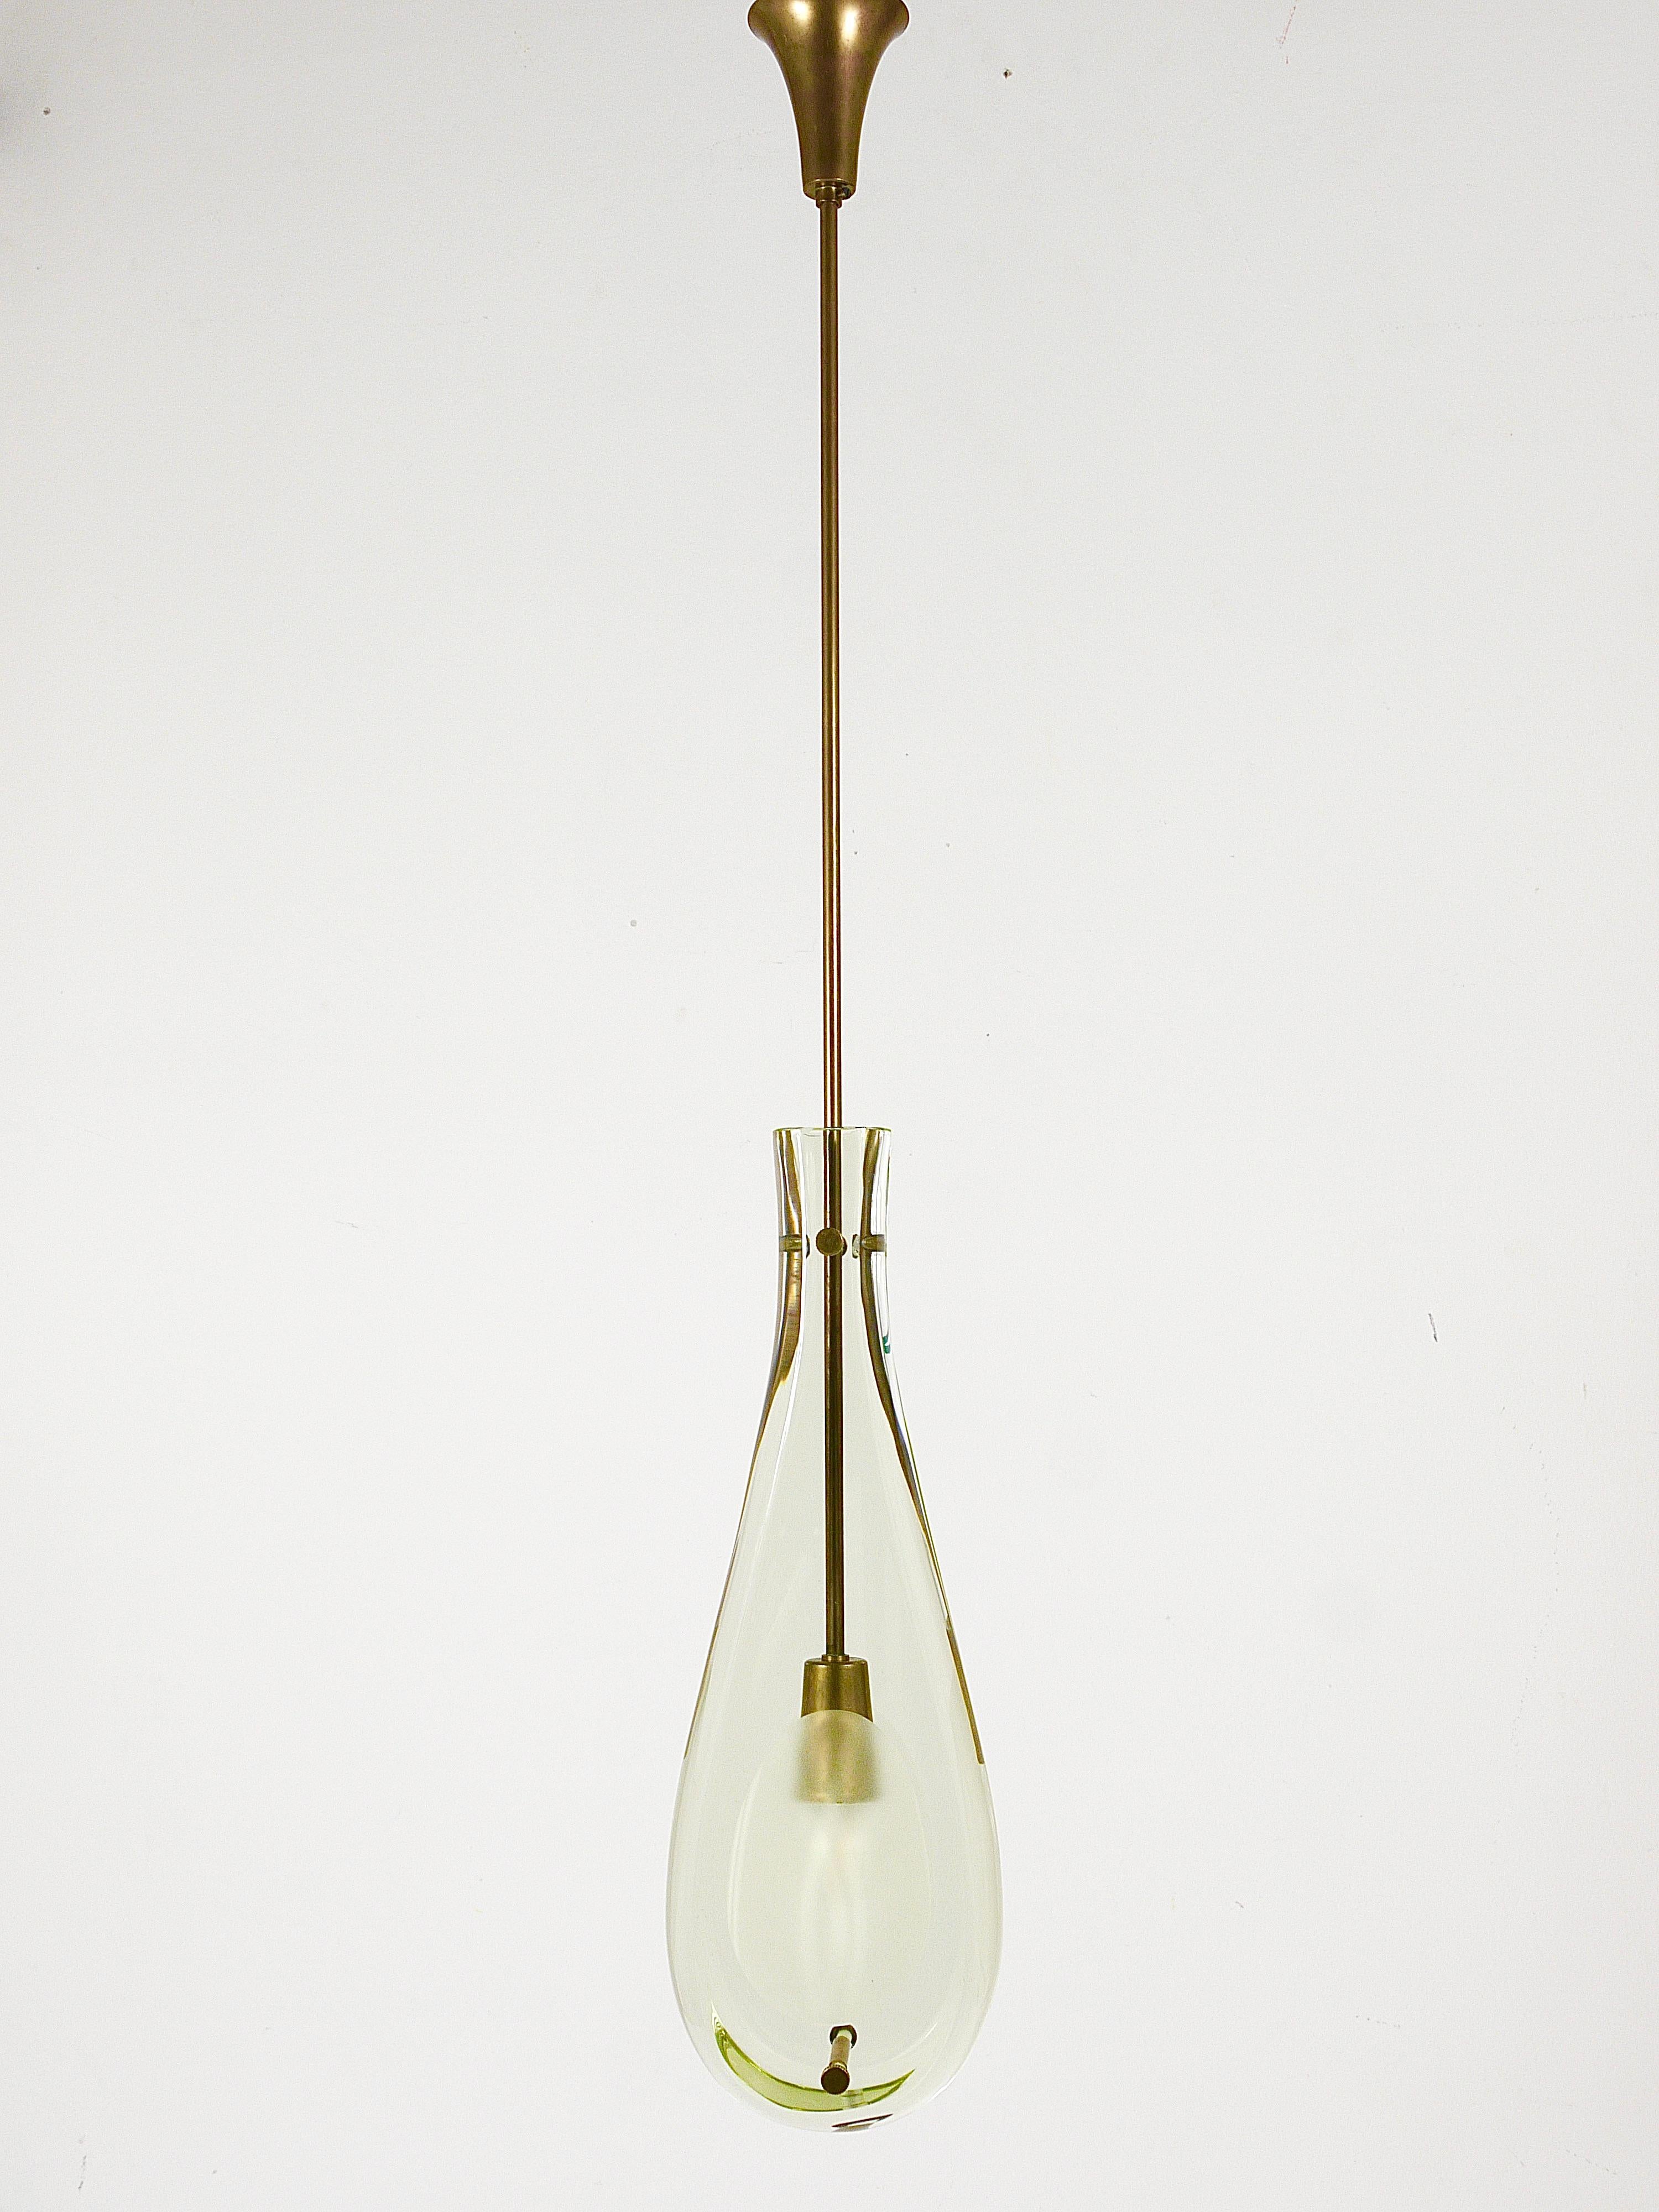 A stunning Mid-century ceiling pendant light chandelier dating back to the 1960s. Model no. 2259, handcrafted by Fontana Arte in Italy and designed by the renowned Max Ingrand. This remarkable light sculpture features brass hardware adorned with two